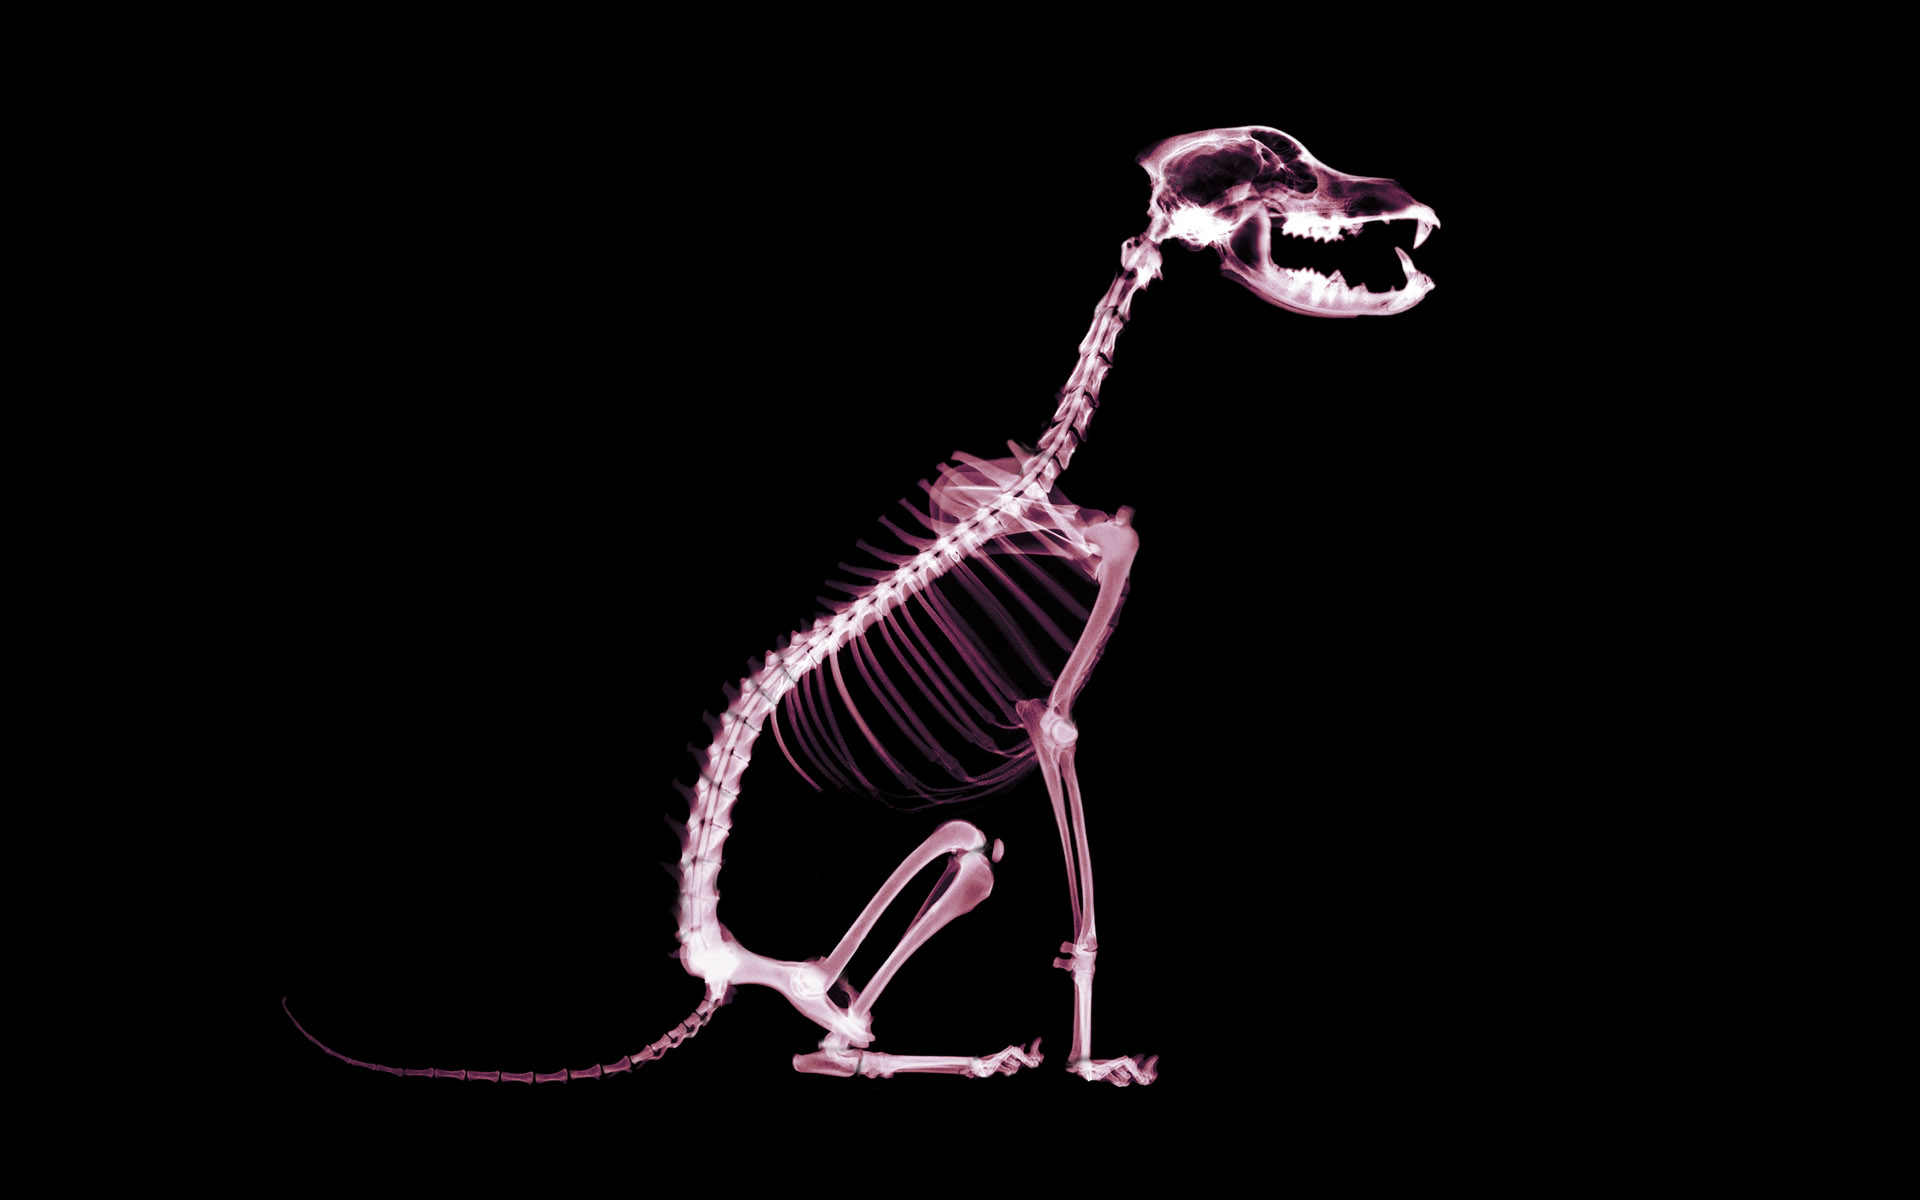 Skeleton dog wallpapers and images   wallpapers pictures photos 1920x1200